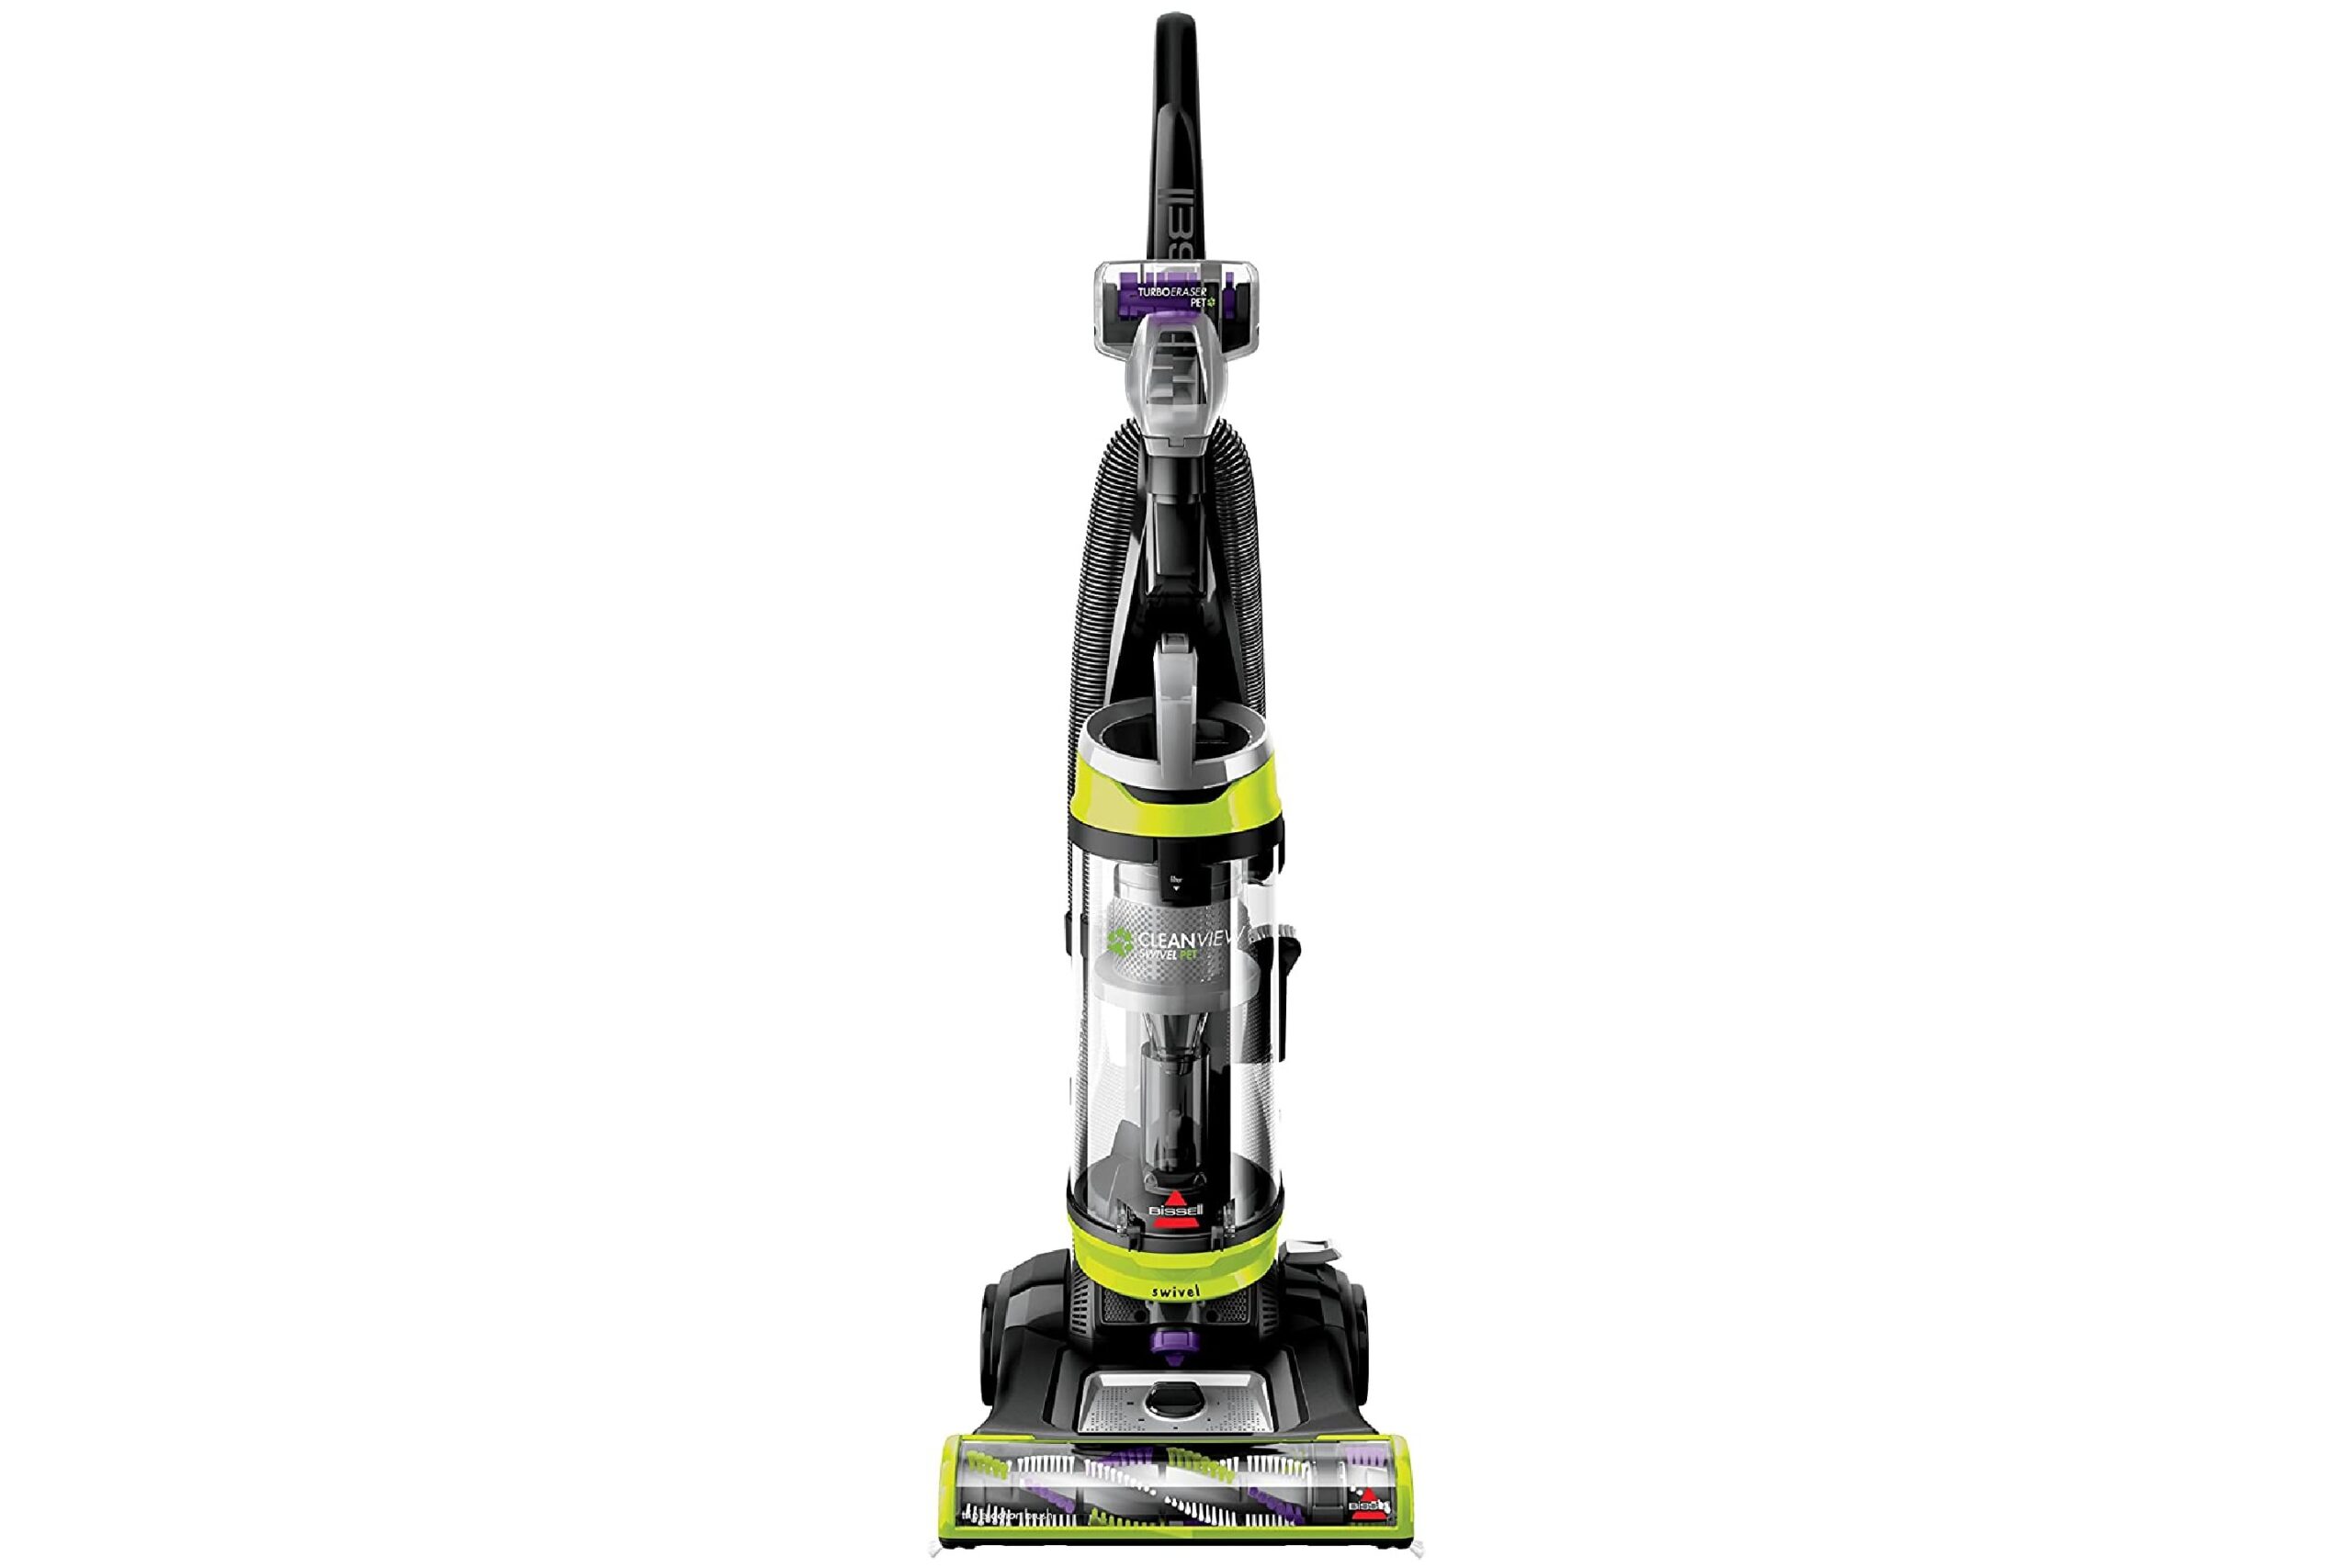 Bissell 2252 CleanView Swivel Pet Vacuum Cleaner